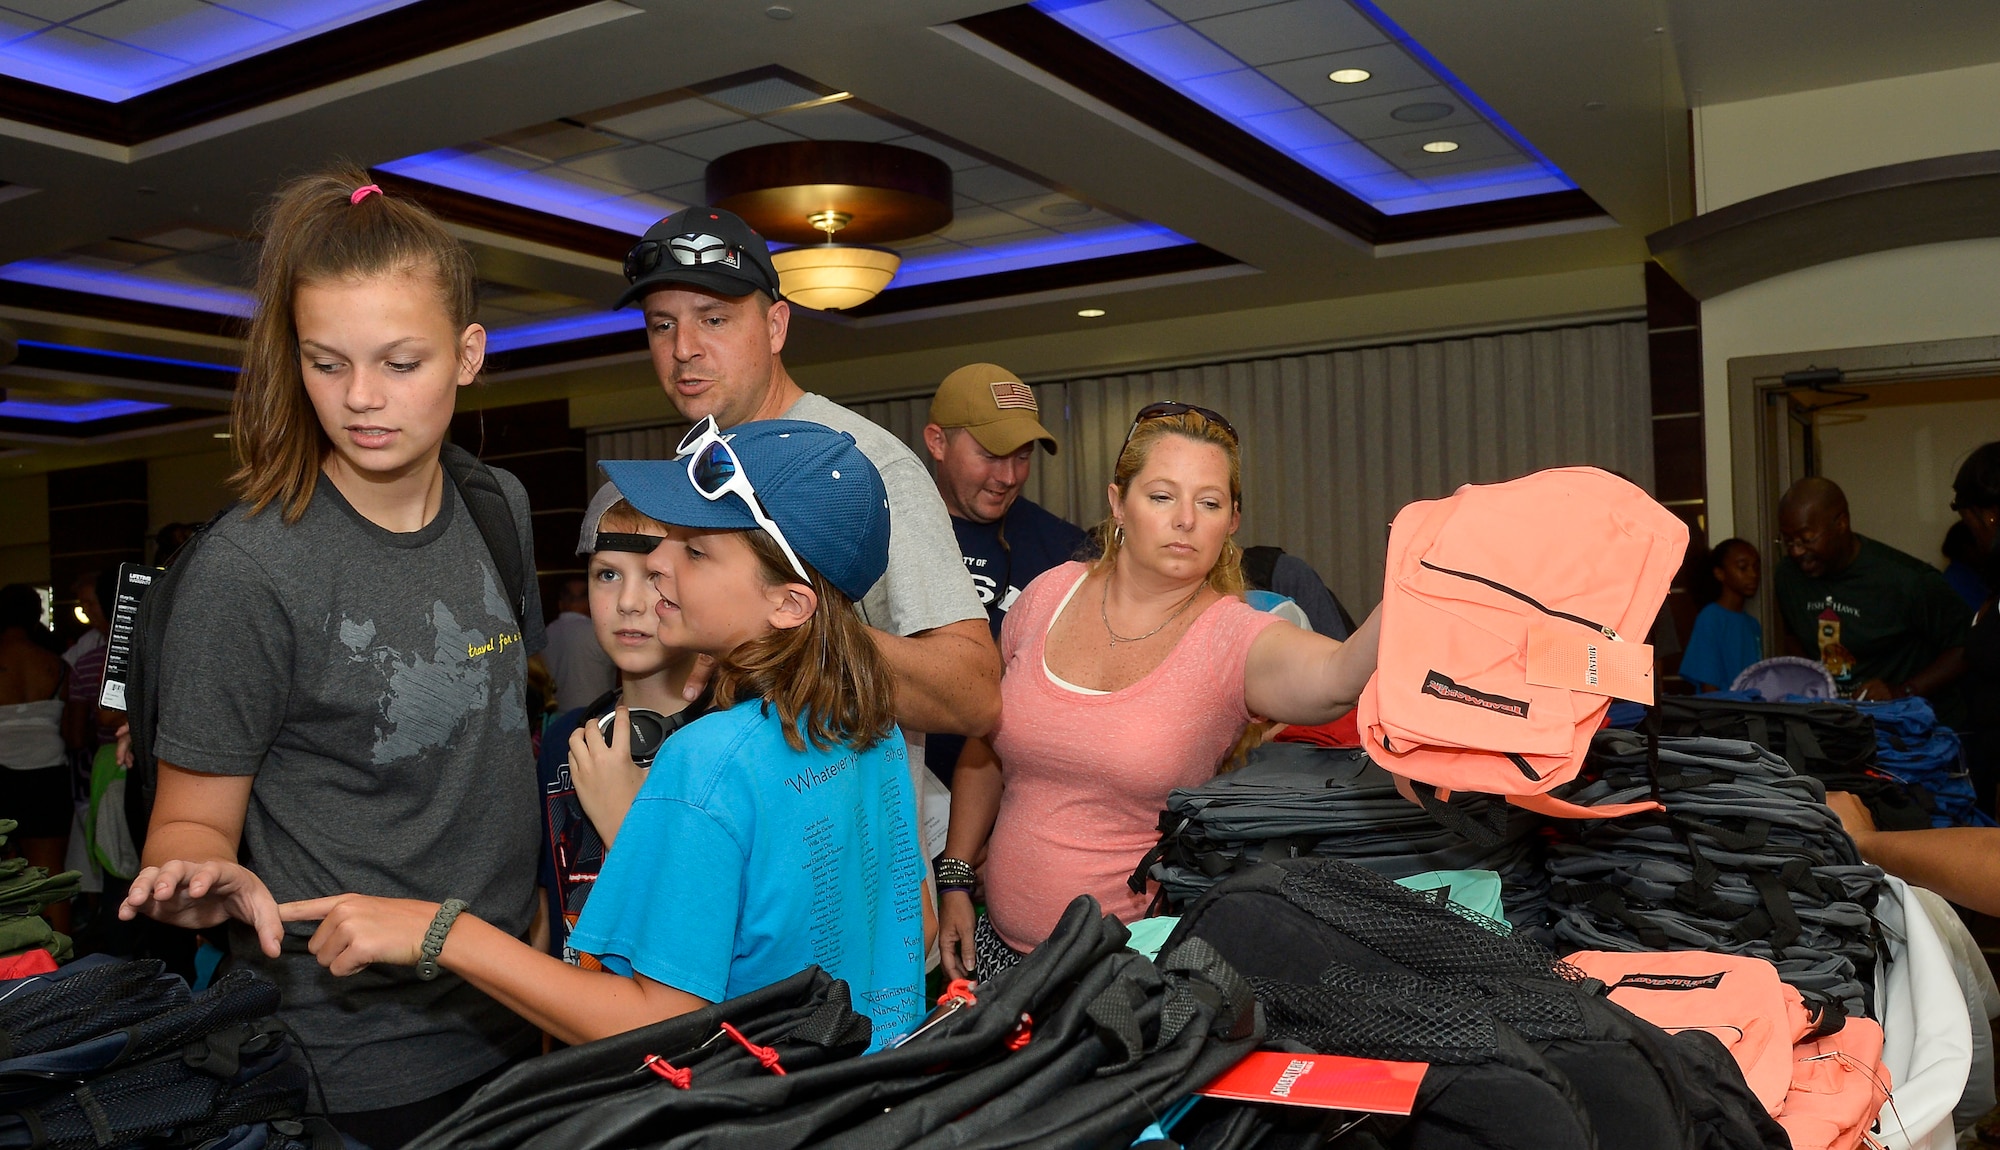 Children and parents select backpacks during the Back to School Fair at MacDill Air Force Base, Fla., July 30, 2016. Participating families received school supplies and giveaways from community agencies and sponsors. (U.S. Air Force photo by Staff Sgt. Shandresha Mitchell)